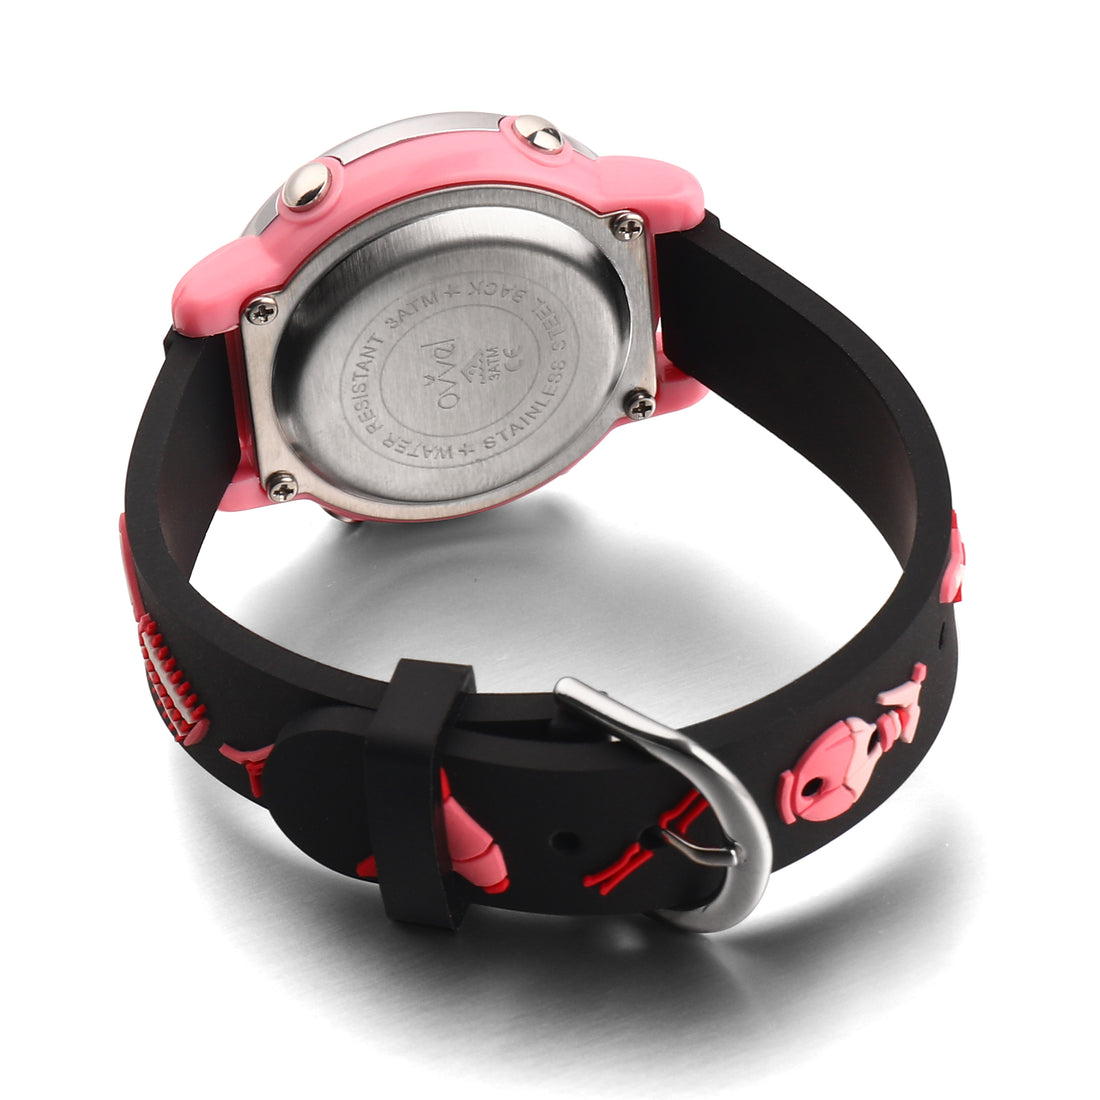 Girls Digital Sports Watch with many features - Hair Accessories